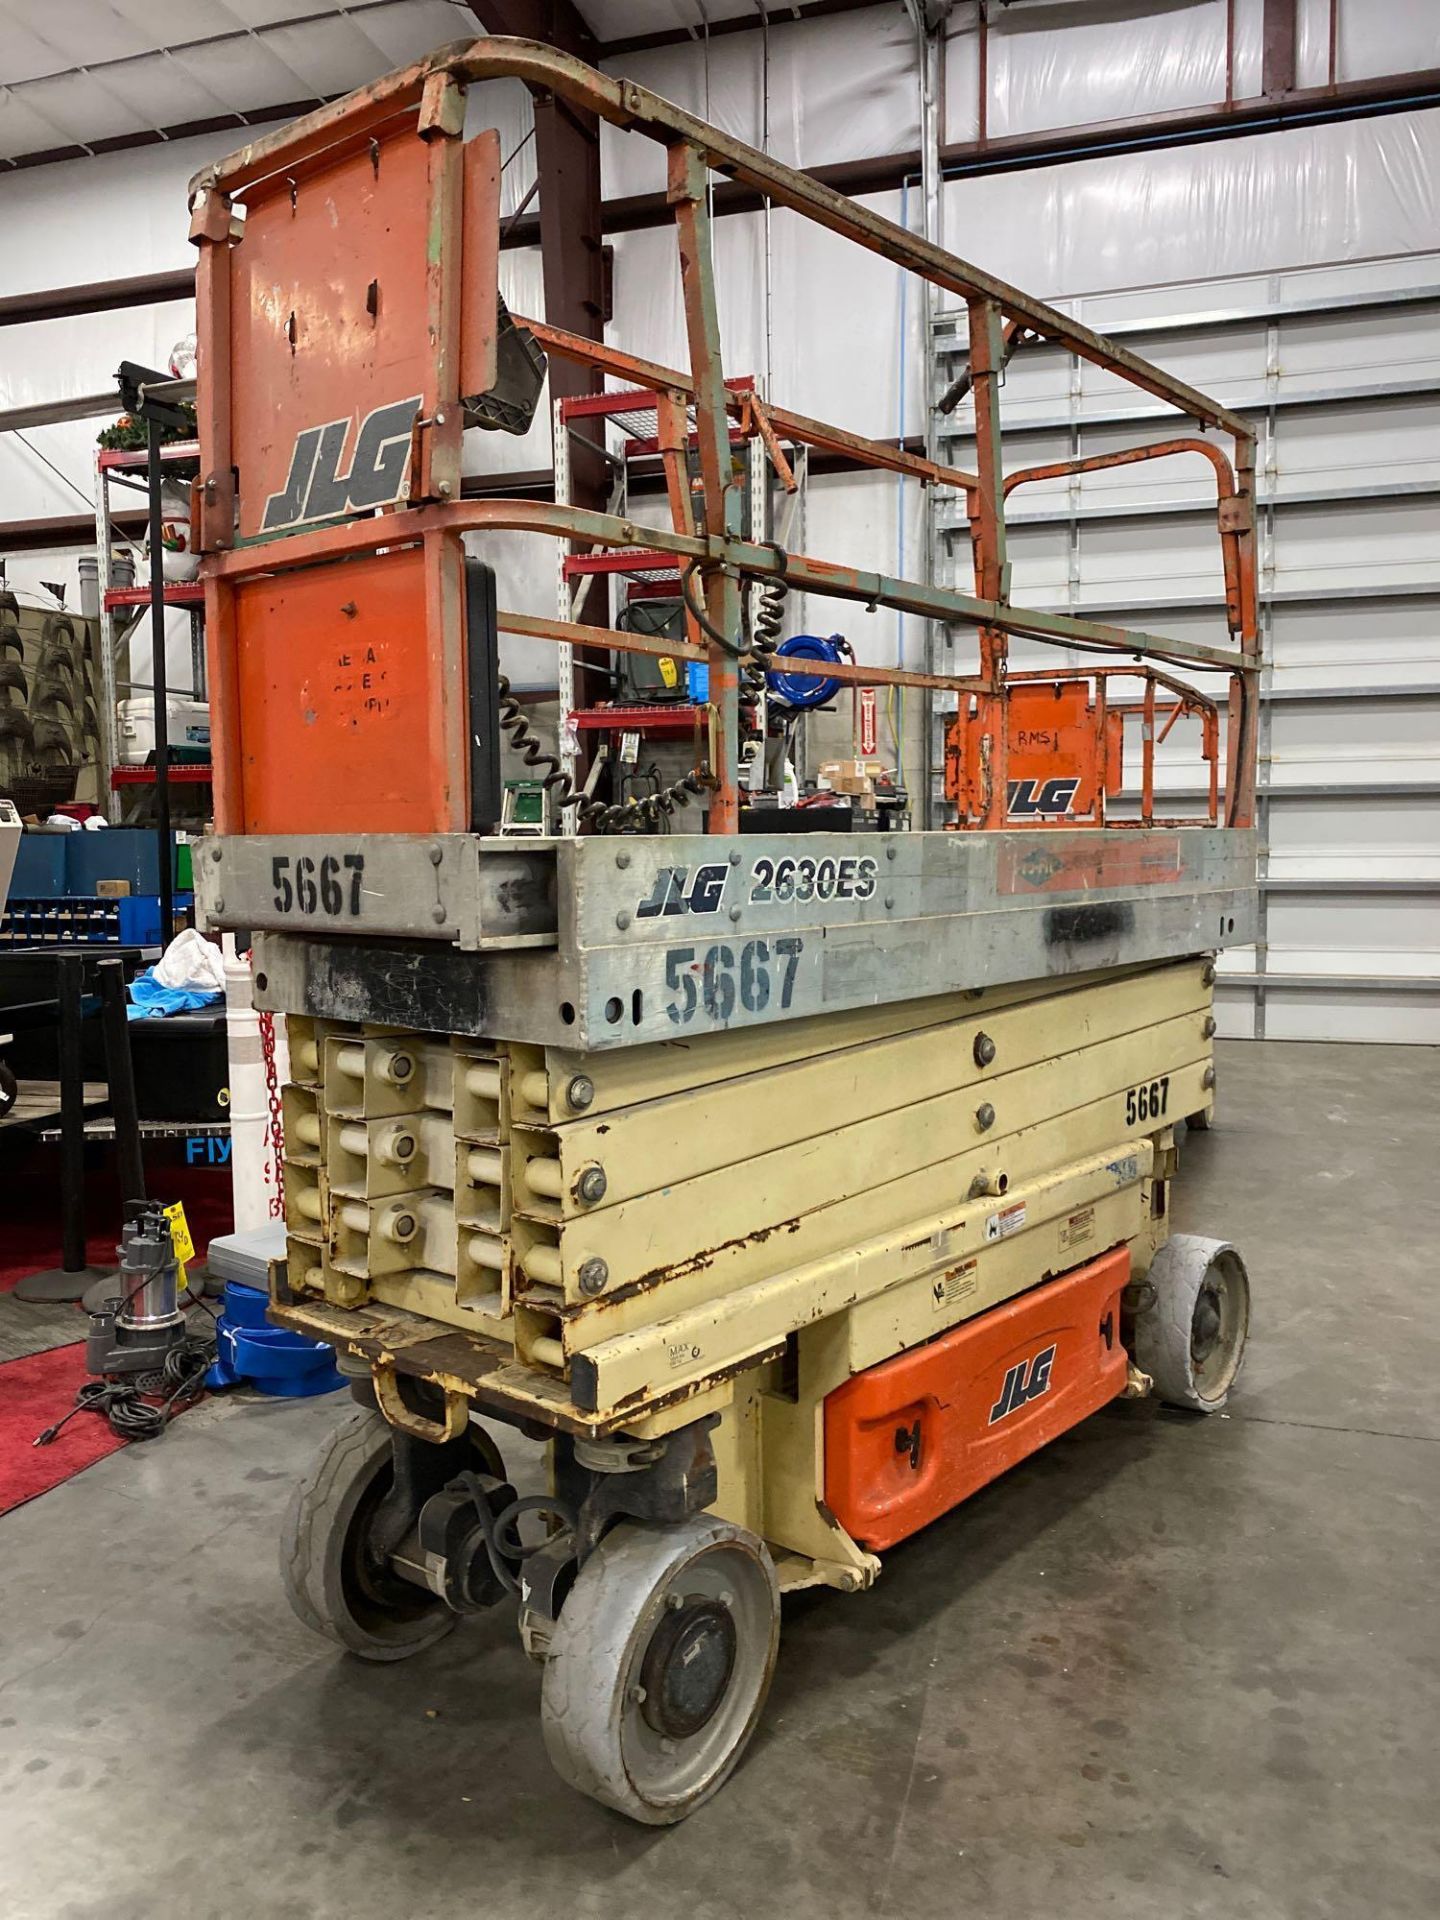 JLG 2630ES ELECTRIC SCISSOR LIFT, SELF PROPELLED, 26' PLATFORM HEIGHT, BUILT IN BATTERY CHARGER, RUN - Image 4 of 14